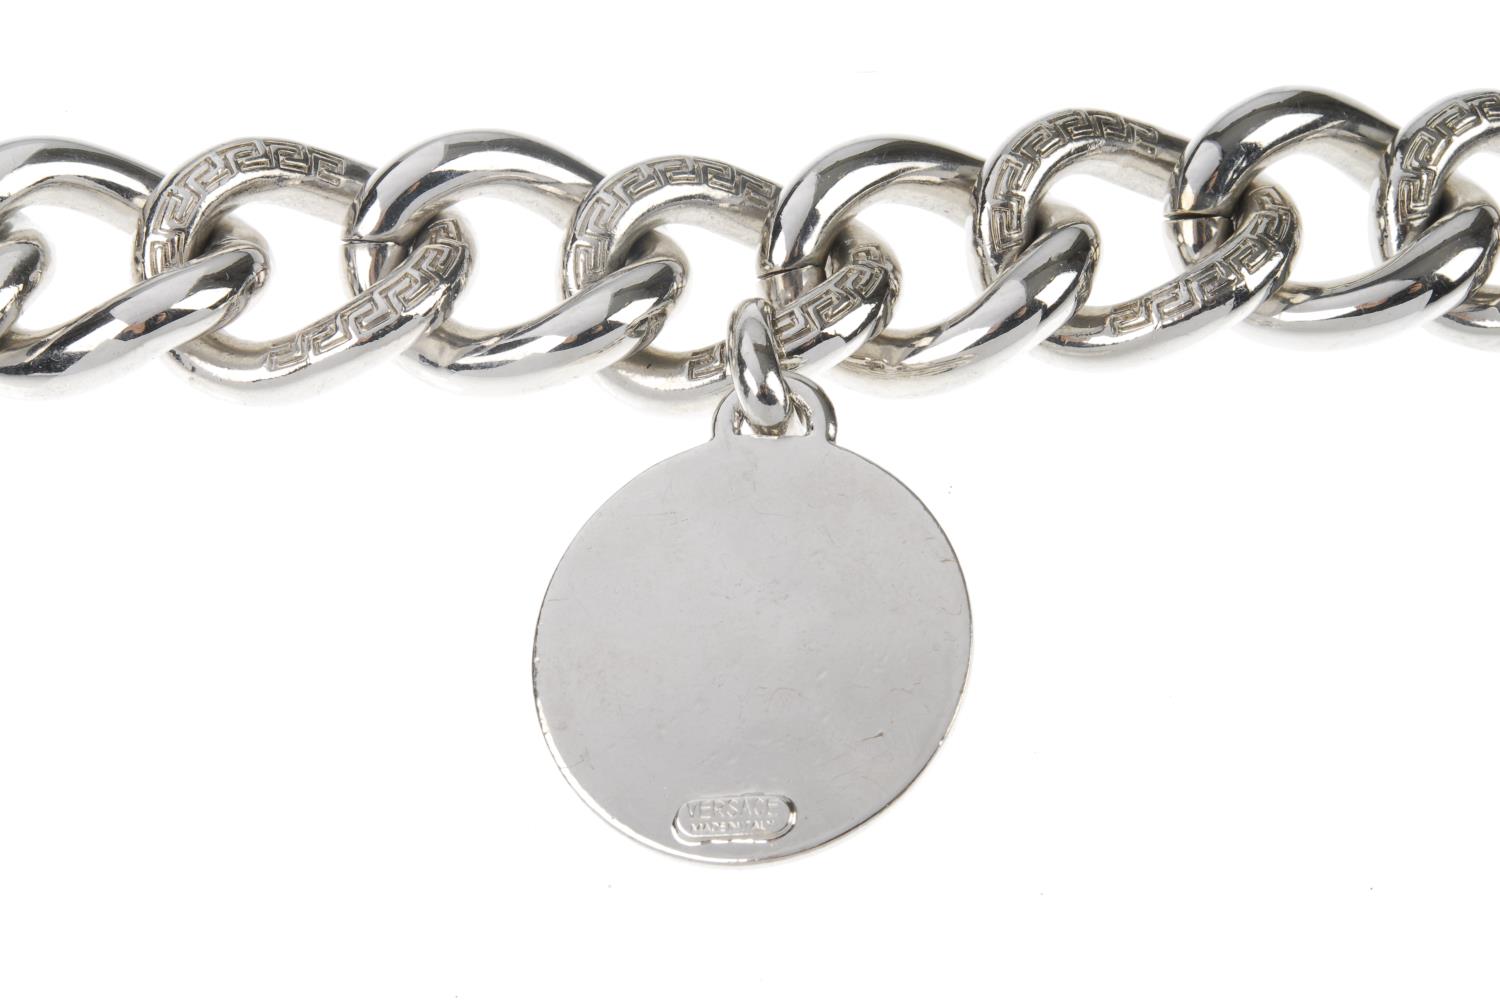 VERSACE - a bracelet. The oversized silver-tone chain link bracelet, with Greek Key engraving, - Image 2 of 3